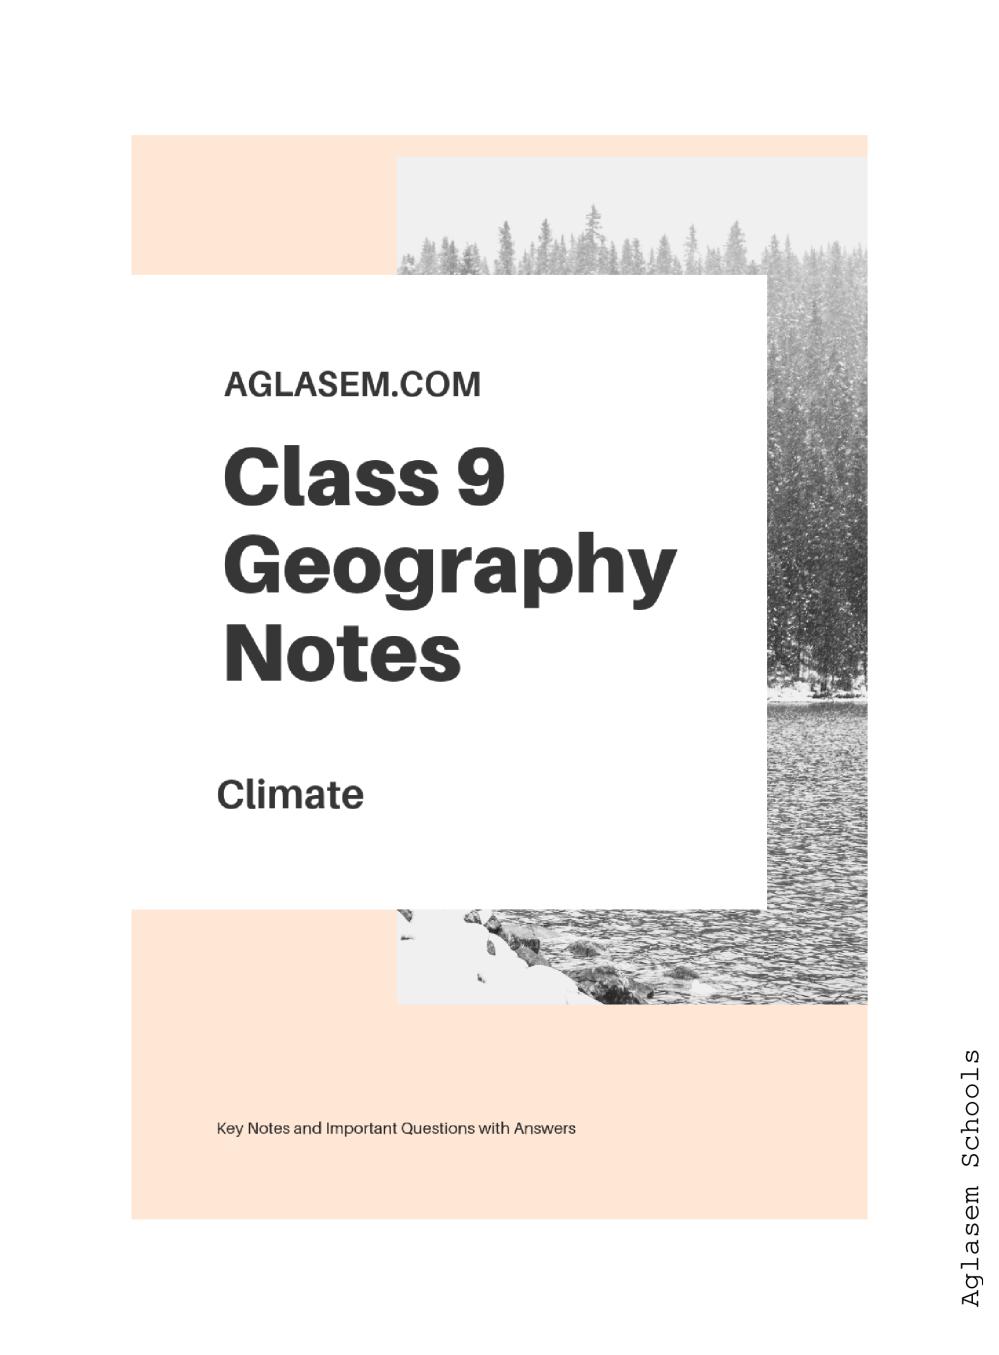 Class 9 Social Science Geography Notes for Climate - Page 1